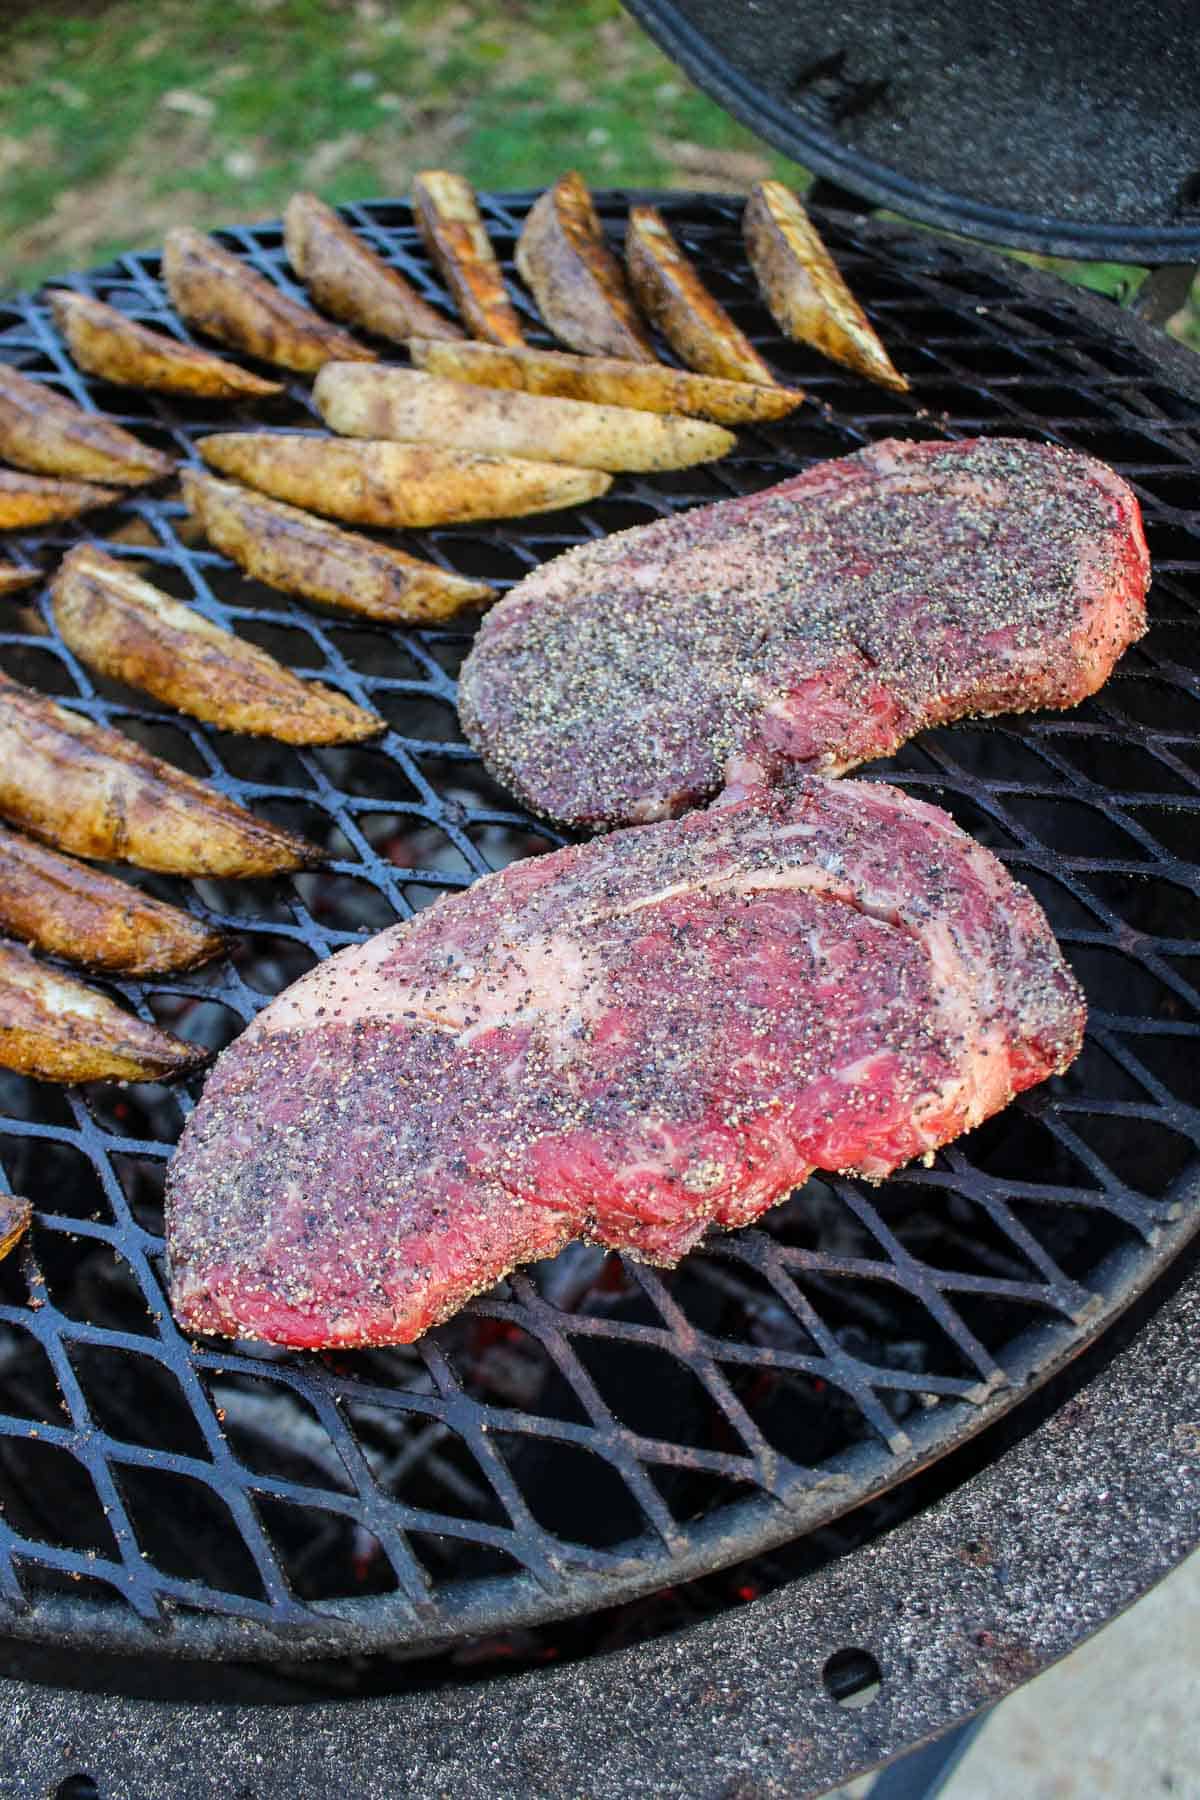 The two ribeye steaks sitting on the grill next to the wedges.